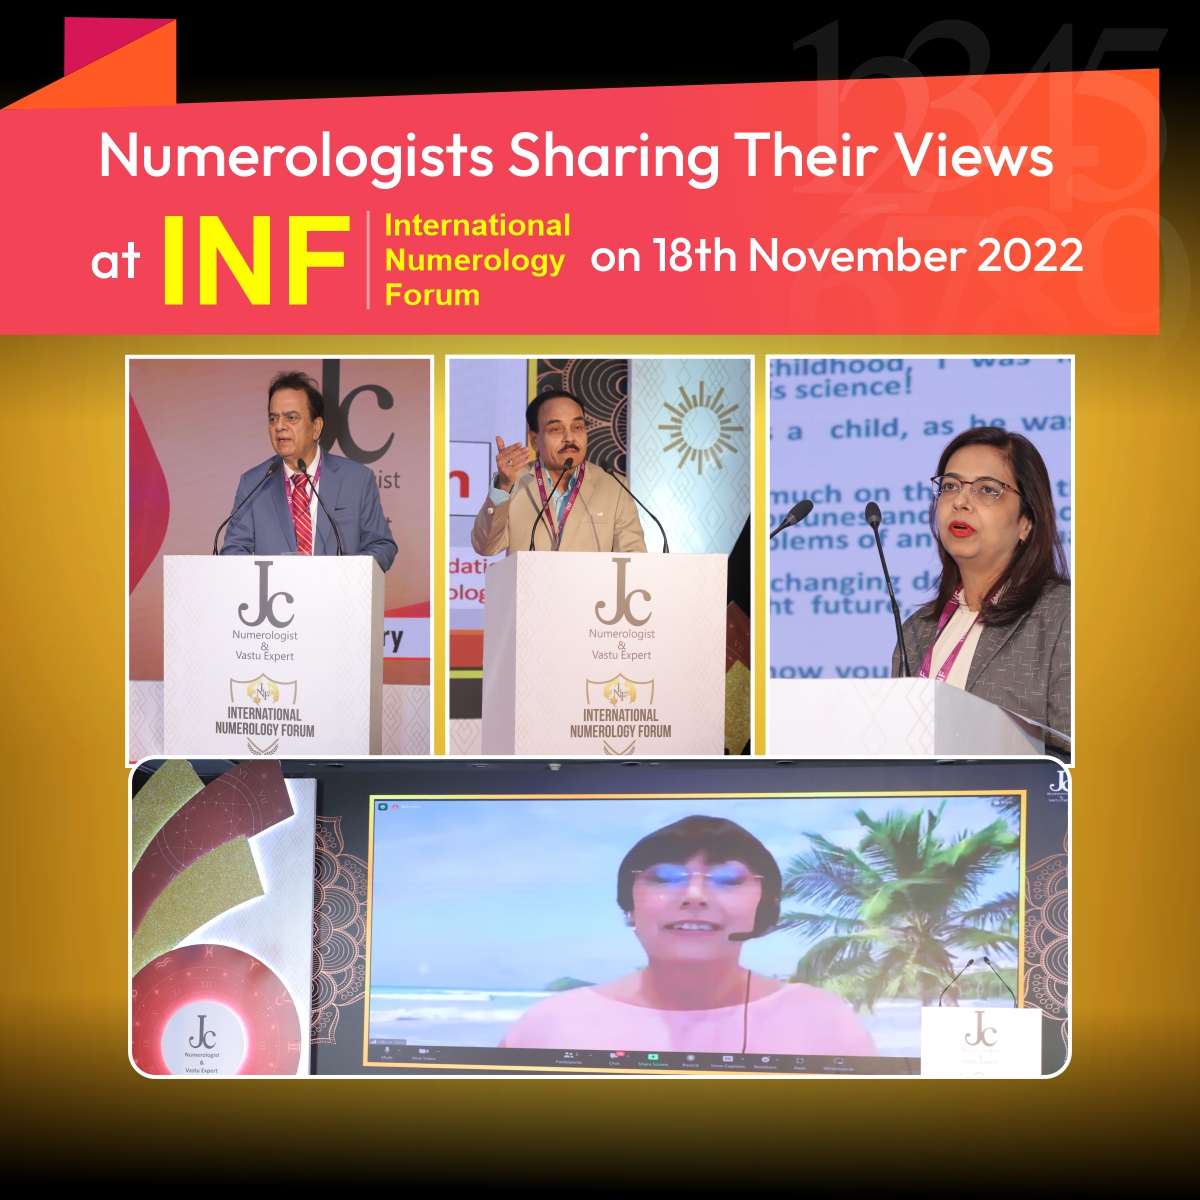 Numerologists from India, USA, UAE, and Australia at INF event 